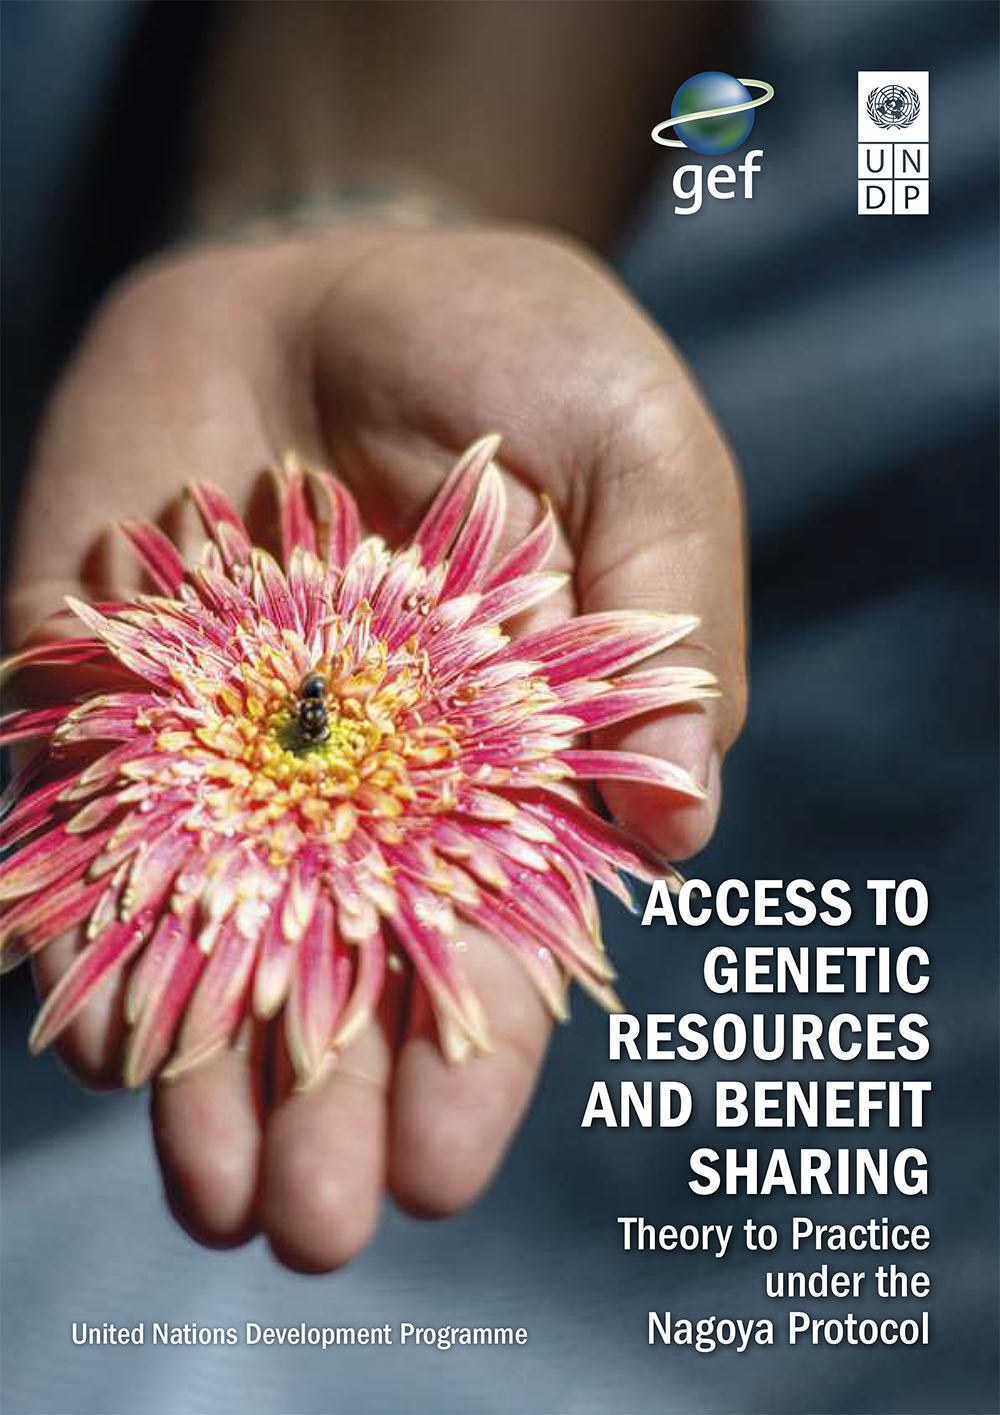 UNDP - GEF - Access to Genetic Resources and Benefit Sharing - Theory to Participate under the Nagoya Protocol